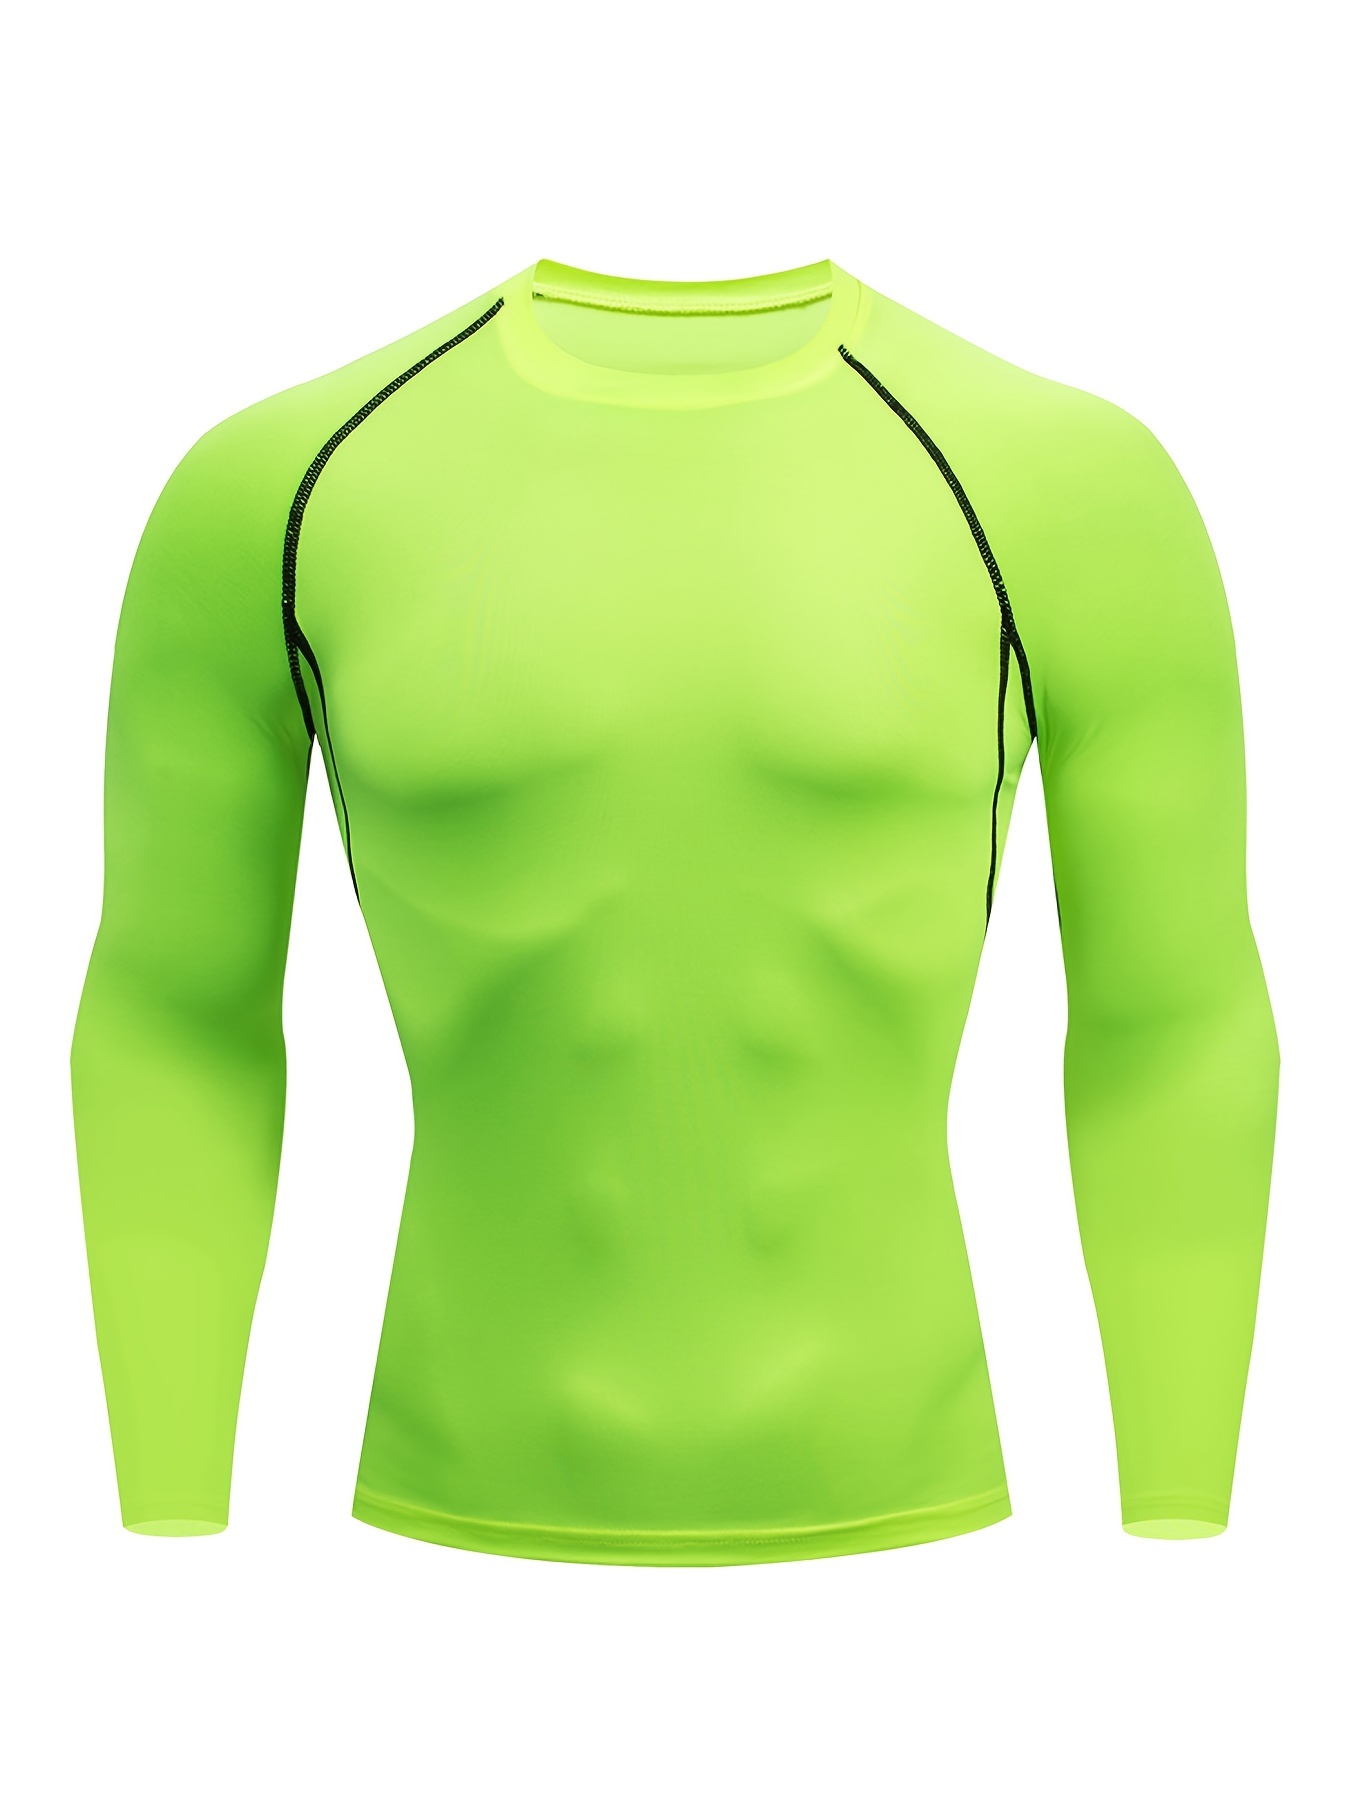 Quick-Dry Men's Compression Shirt - Fluorescent Green Athletic Base Layer  for Workouts and Sports